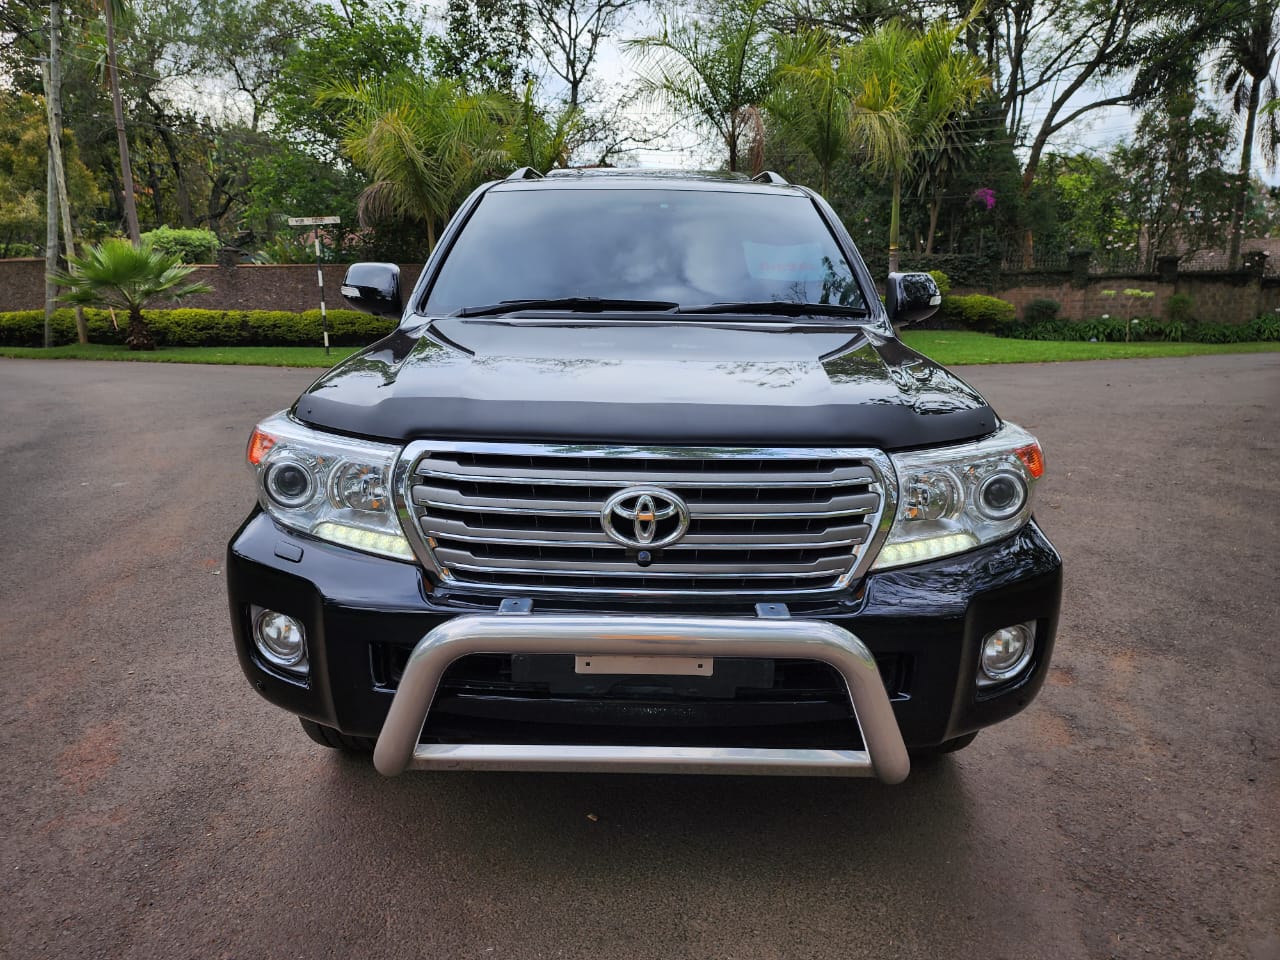 Toyota Land cruiser VX V8 2015 DIESEL SUNROOF leather TRADE IN OK EXCLUSIVE